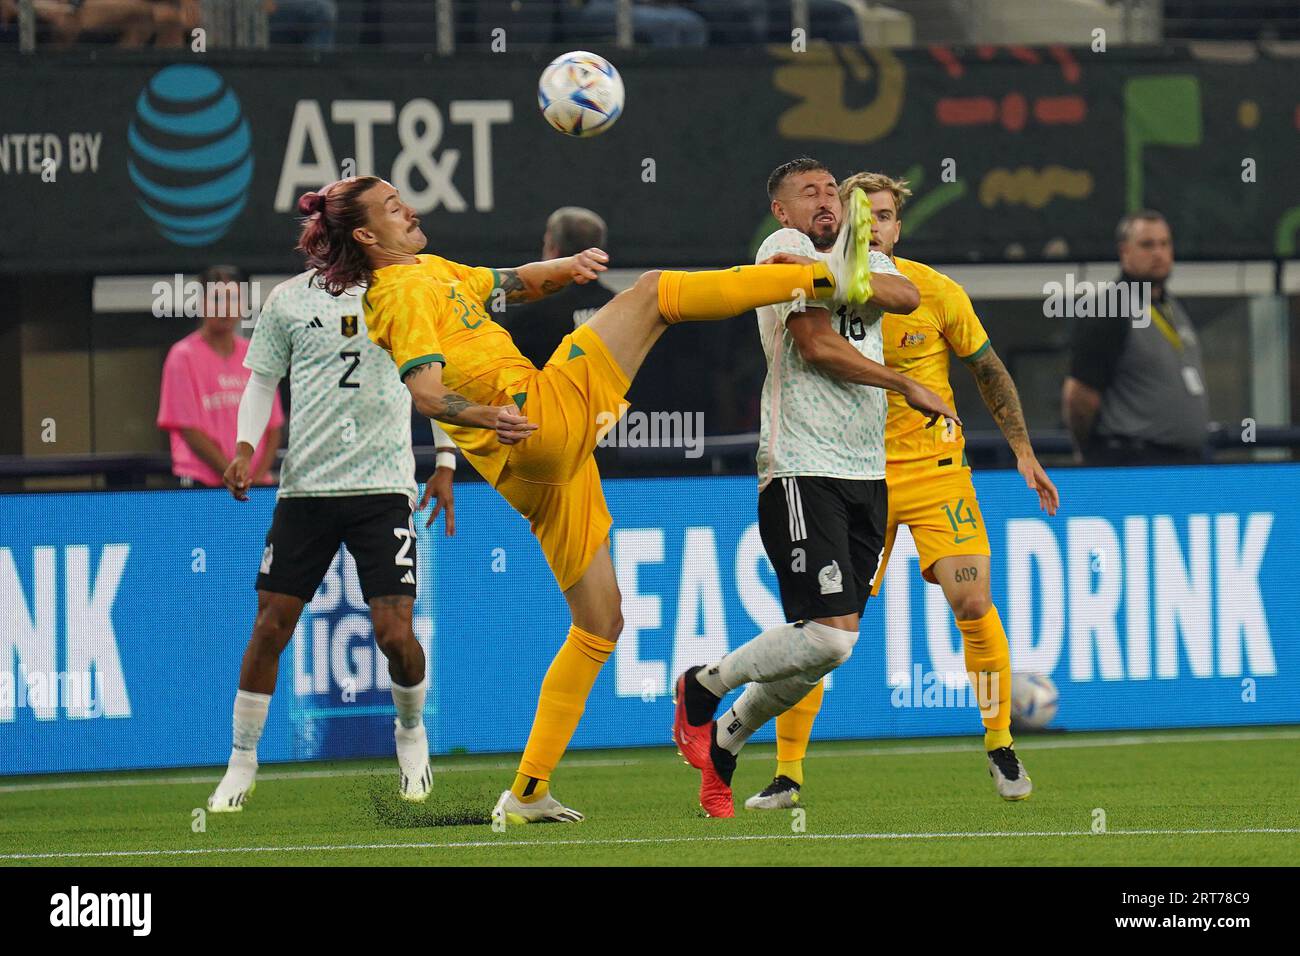 Arlington, Texas, United States: Jackson Irvine (AU) and Hector Herrera (MX) battle for the ball during the international soccer game between Mexico and Australia played at AT&T Stadium on Saturday September 9, 2023.  (Photo by Javier Vicencio / Eyepix Group/Sipa USA) Stock Photo